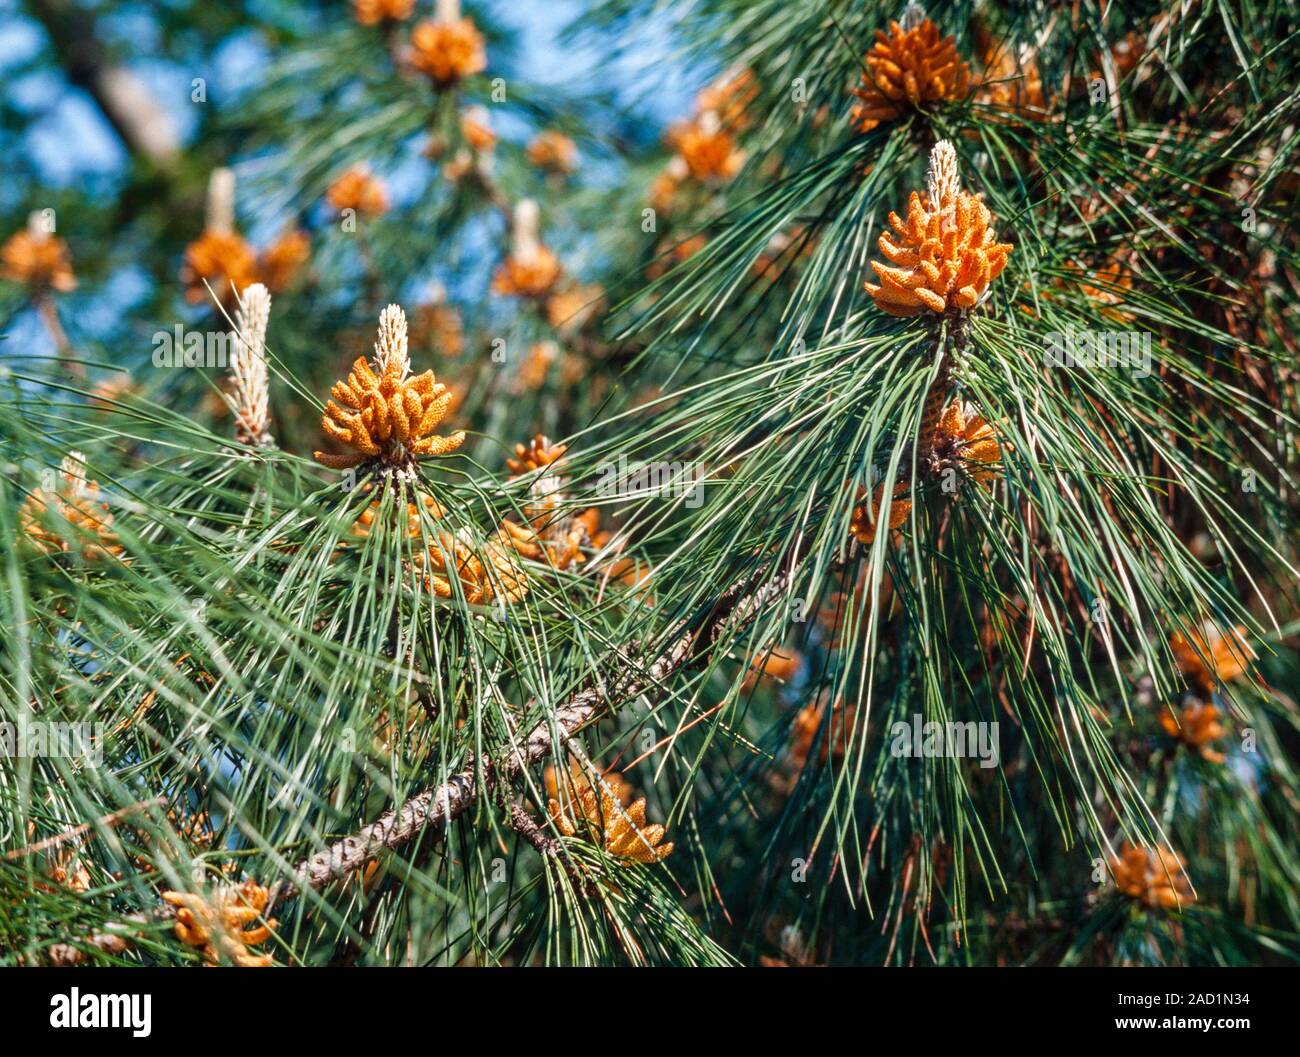 Pine tree, Pinus sp. young developing cones Stock Photo